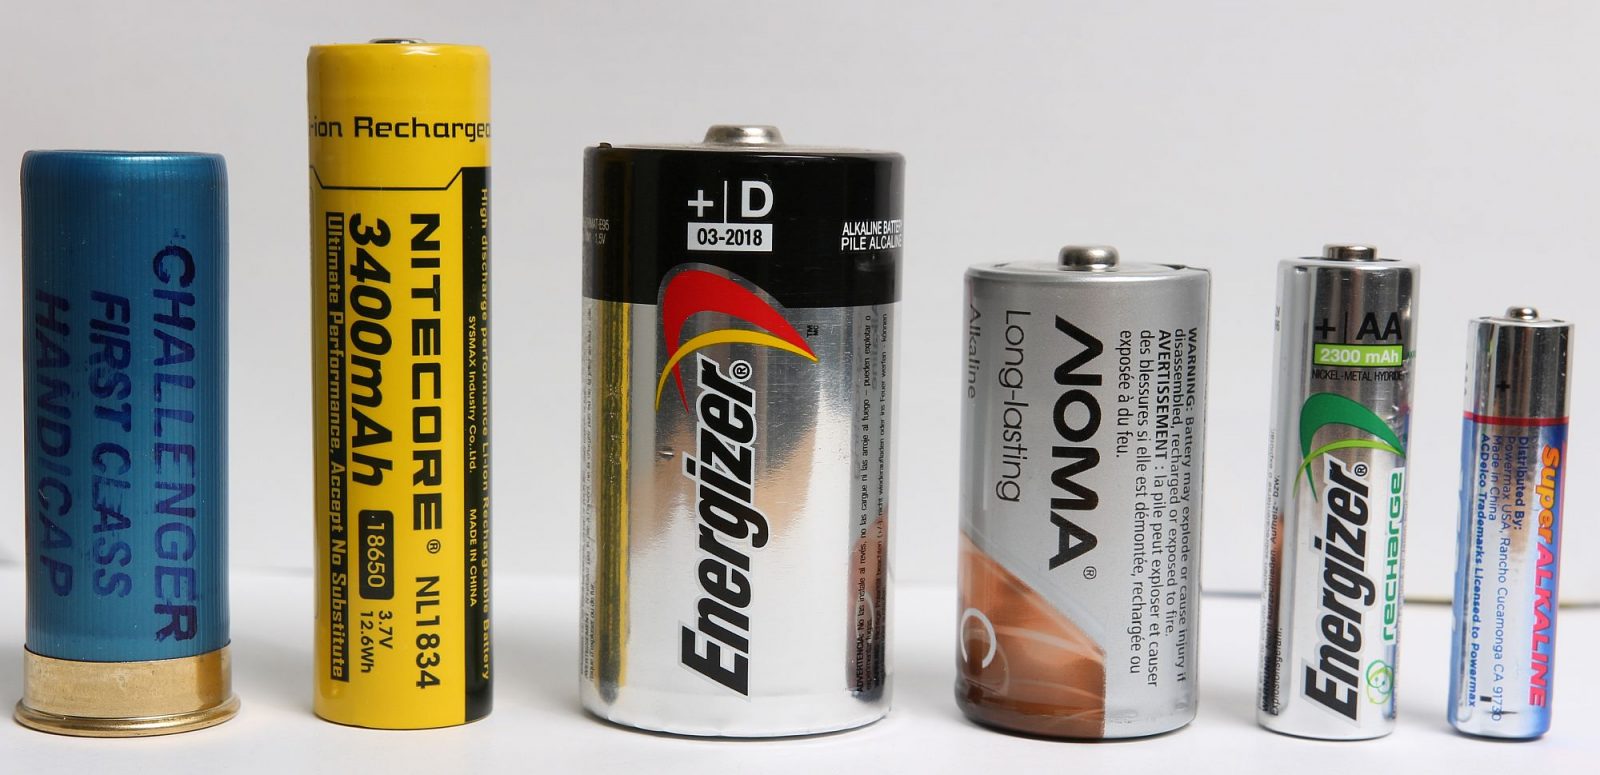 18650-battery-compared-with-other-batteries.jpg